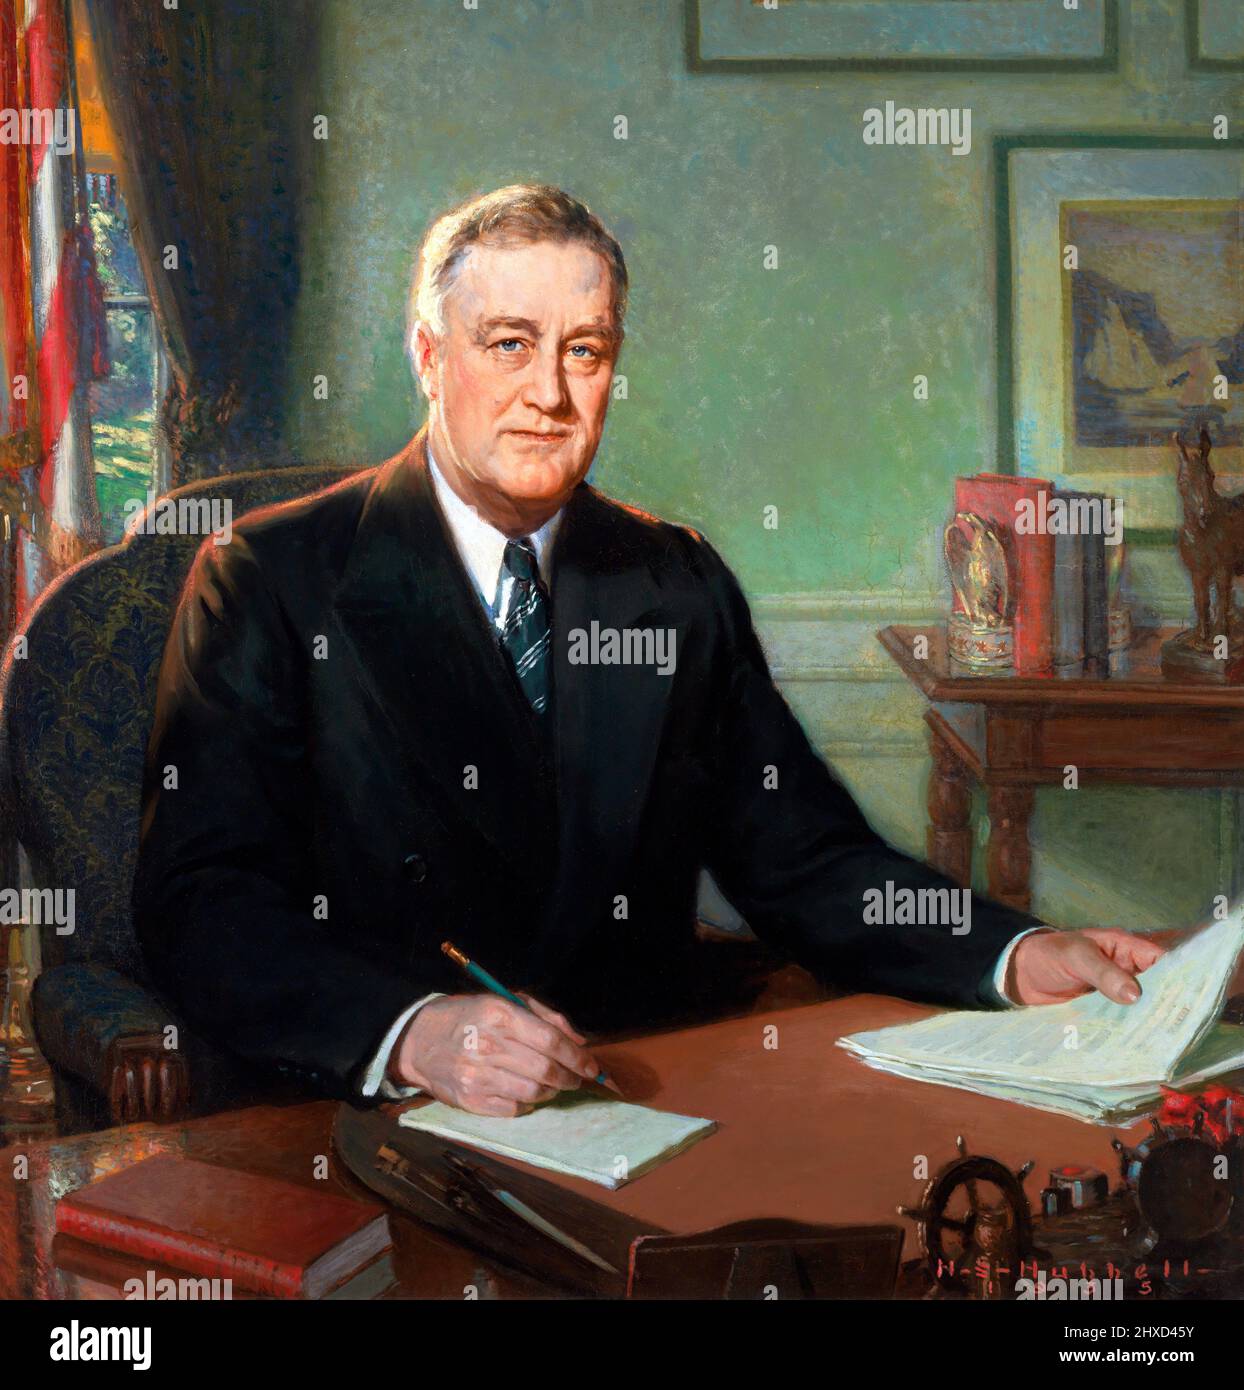 Portrait of Franklin D Roosevelt (1882-1945), the 32nd President of the USA, by Henry Salem Hubbell, oil on masonite, 1935 Stock Photo